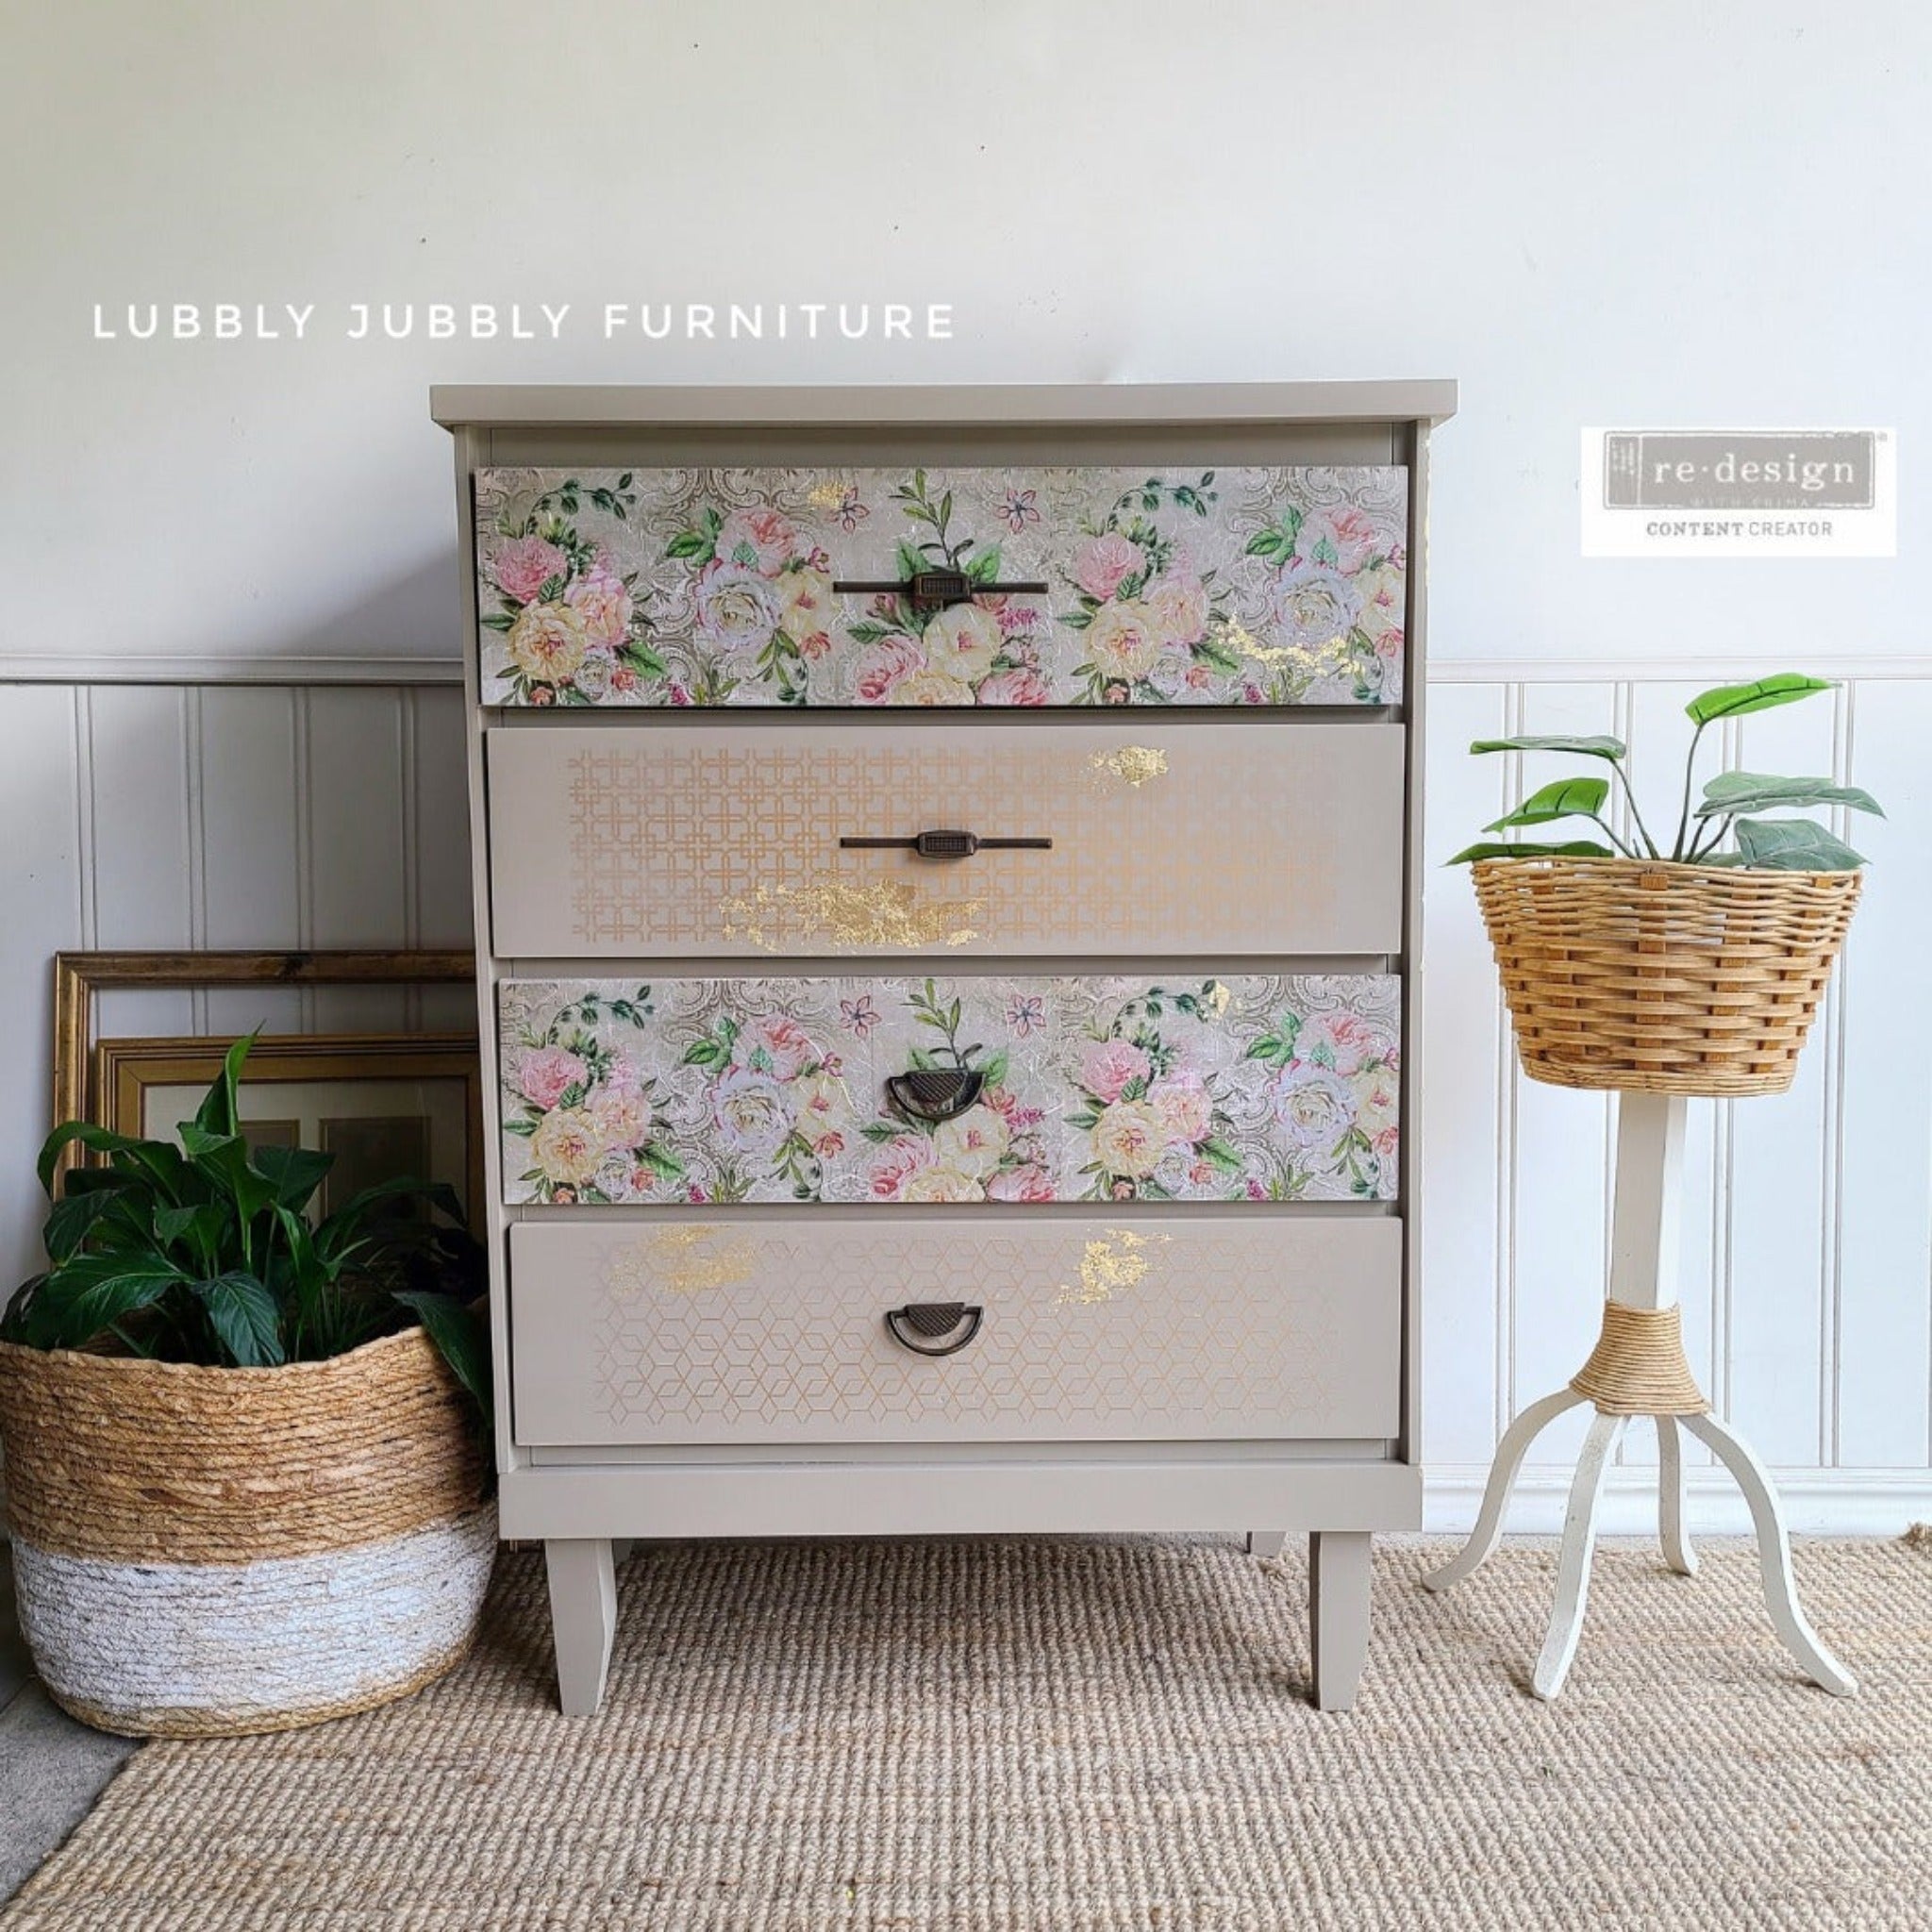 A 4-drawer dresser refurbished by Lubbly Jubbly Furniture is painted light beige and features ReDesign with Prima's Motif Geometrique small transfer on its 2nd and 4th drawer. A floral transfer is on the other 2 drawers.